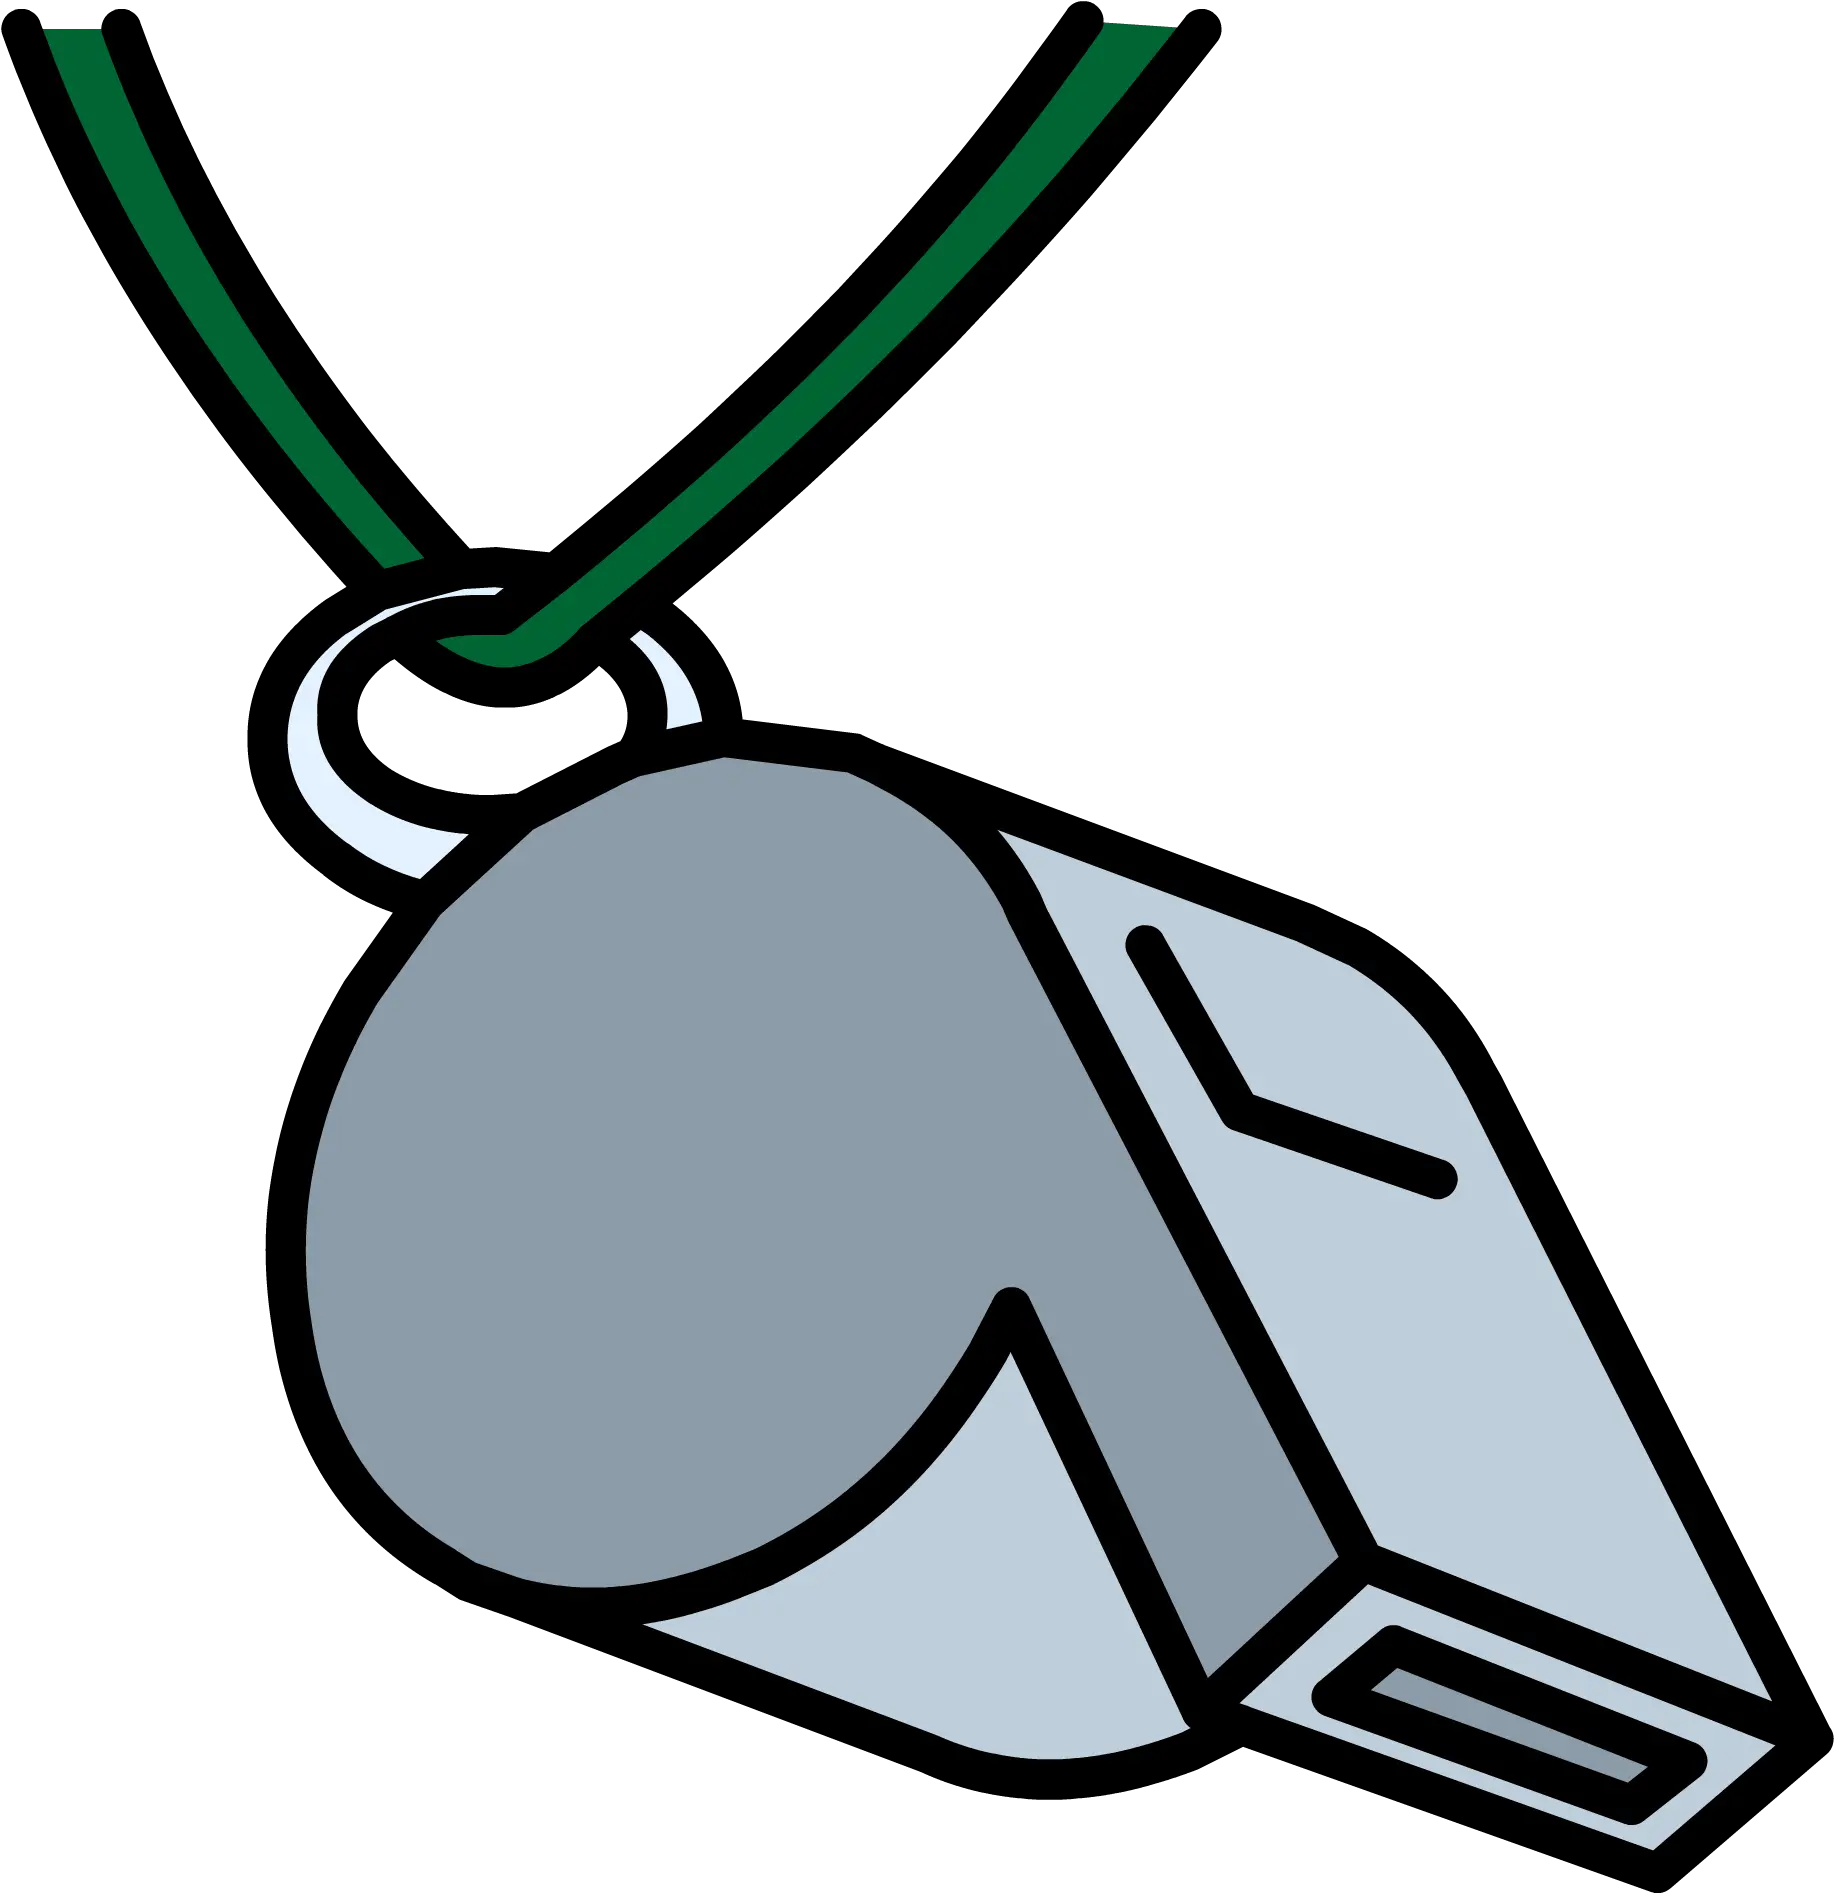 Silver Whistle Whistle Clipart Png Transparent Cartoon Whistle Clipart Png Whistle Png